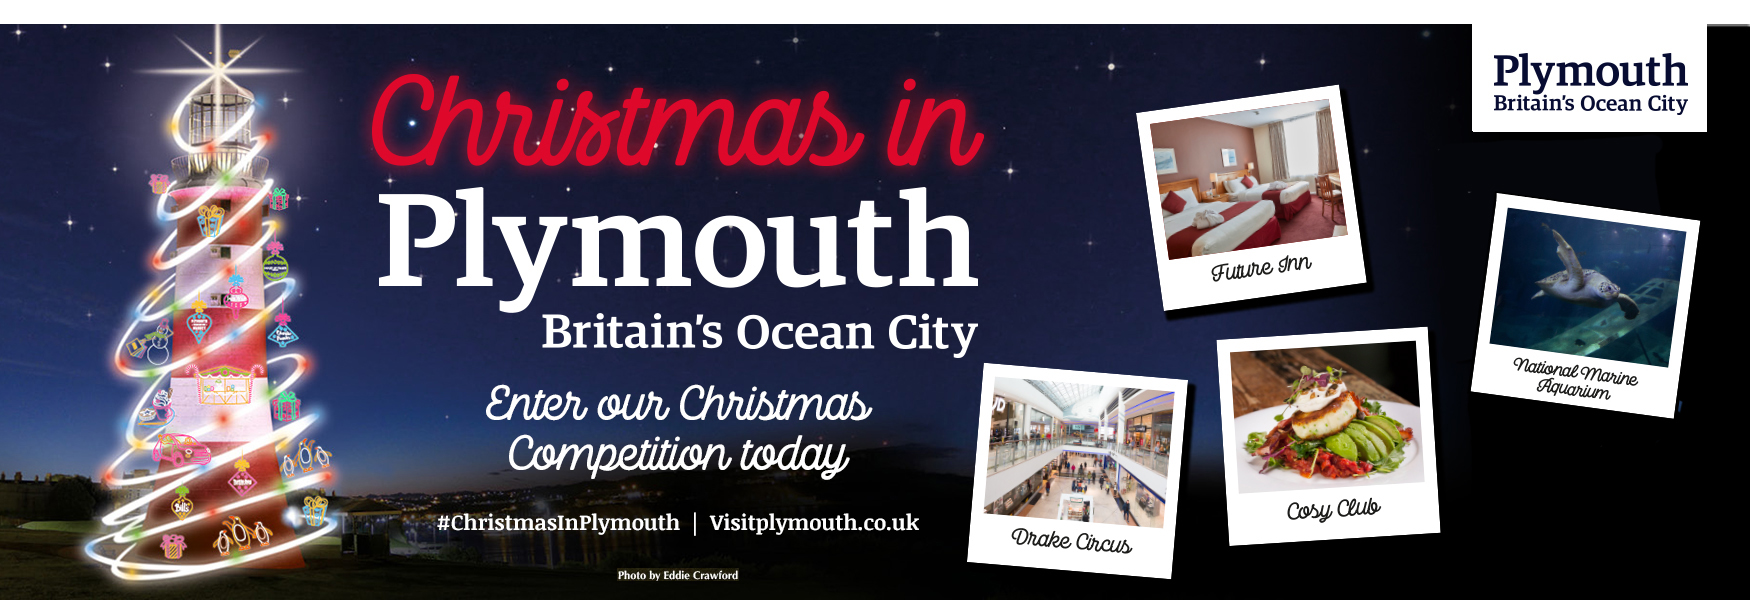 Christmas In Plymouth Win a Family Break with Visit Plymouth